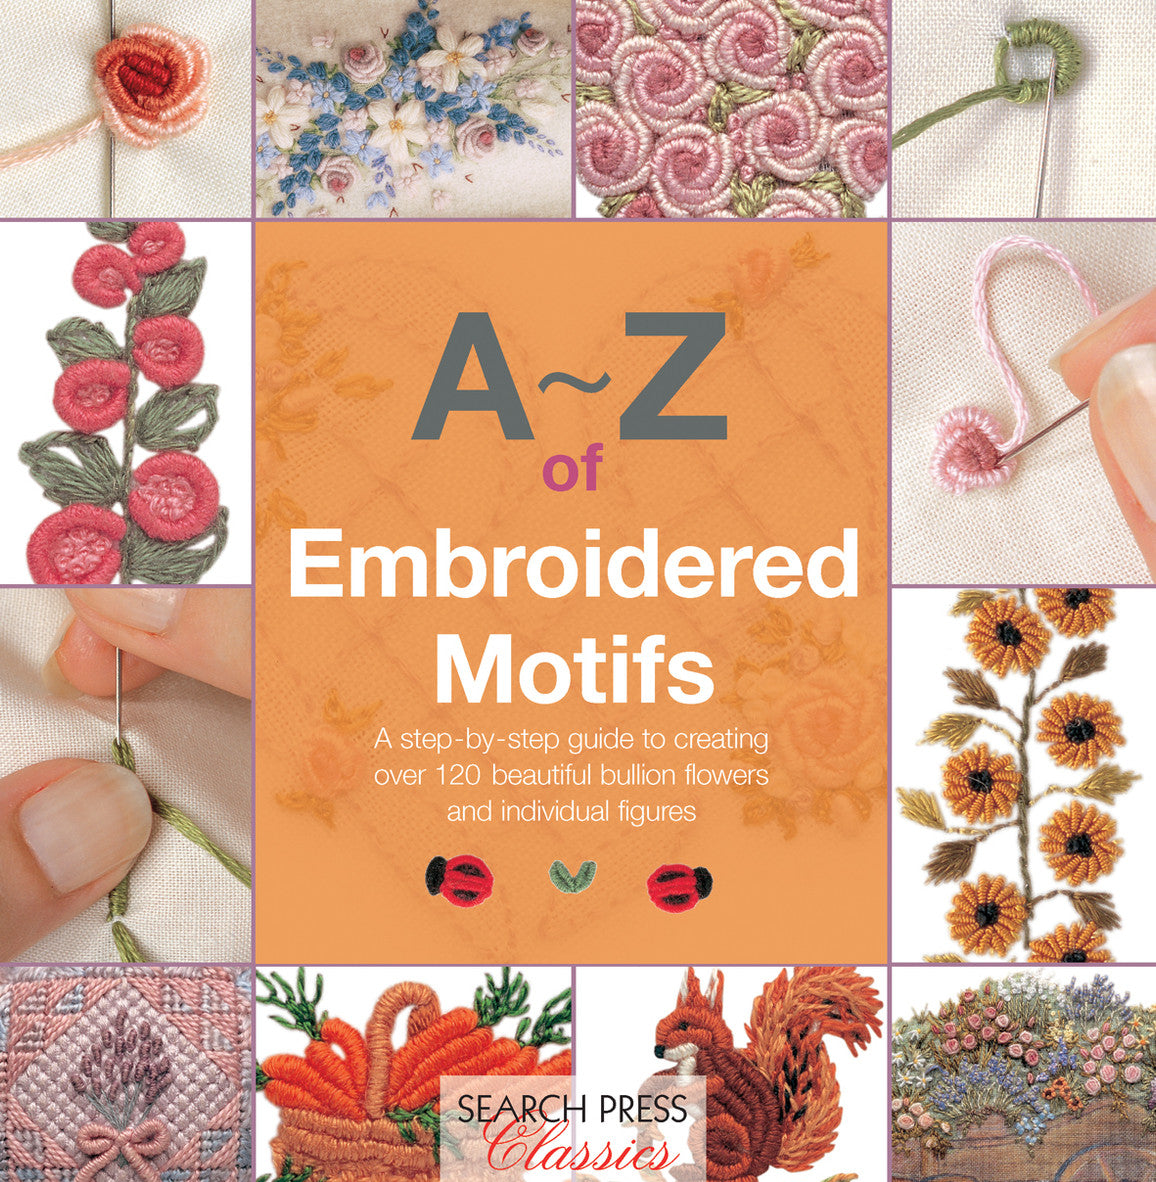 A-Z of Embroidered Motifs Book by Country Bumpkin